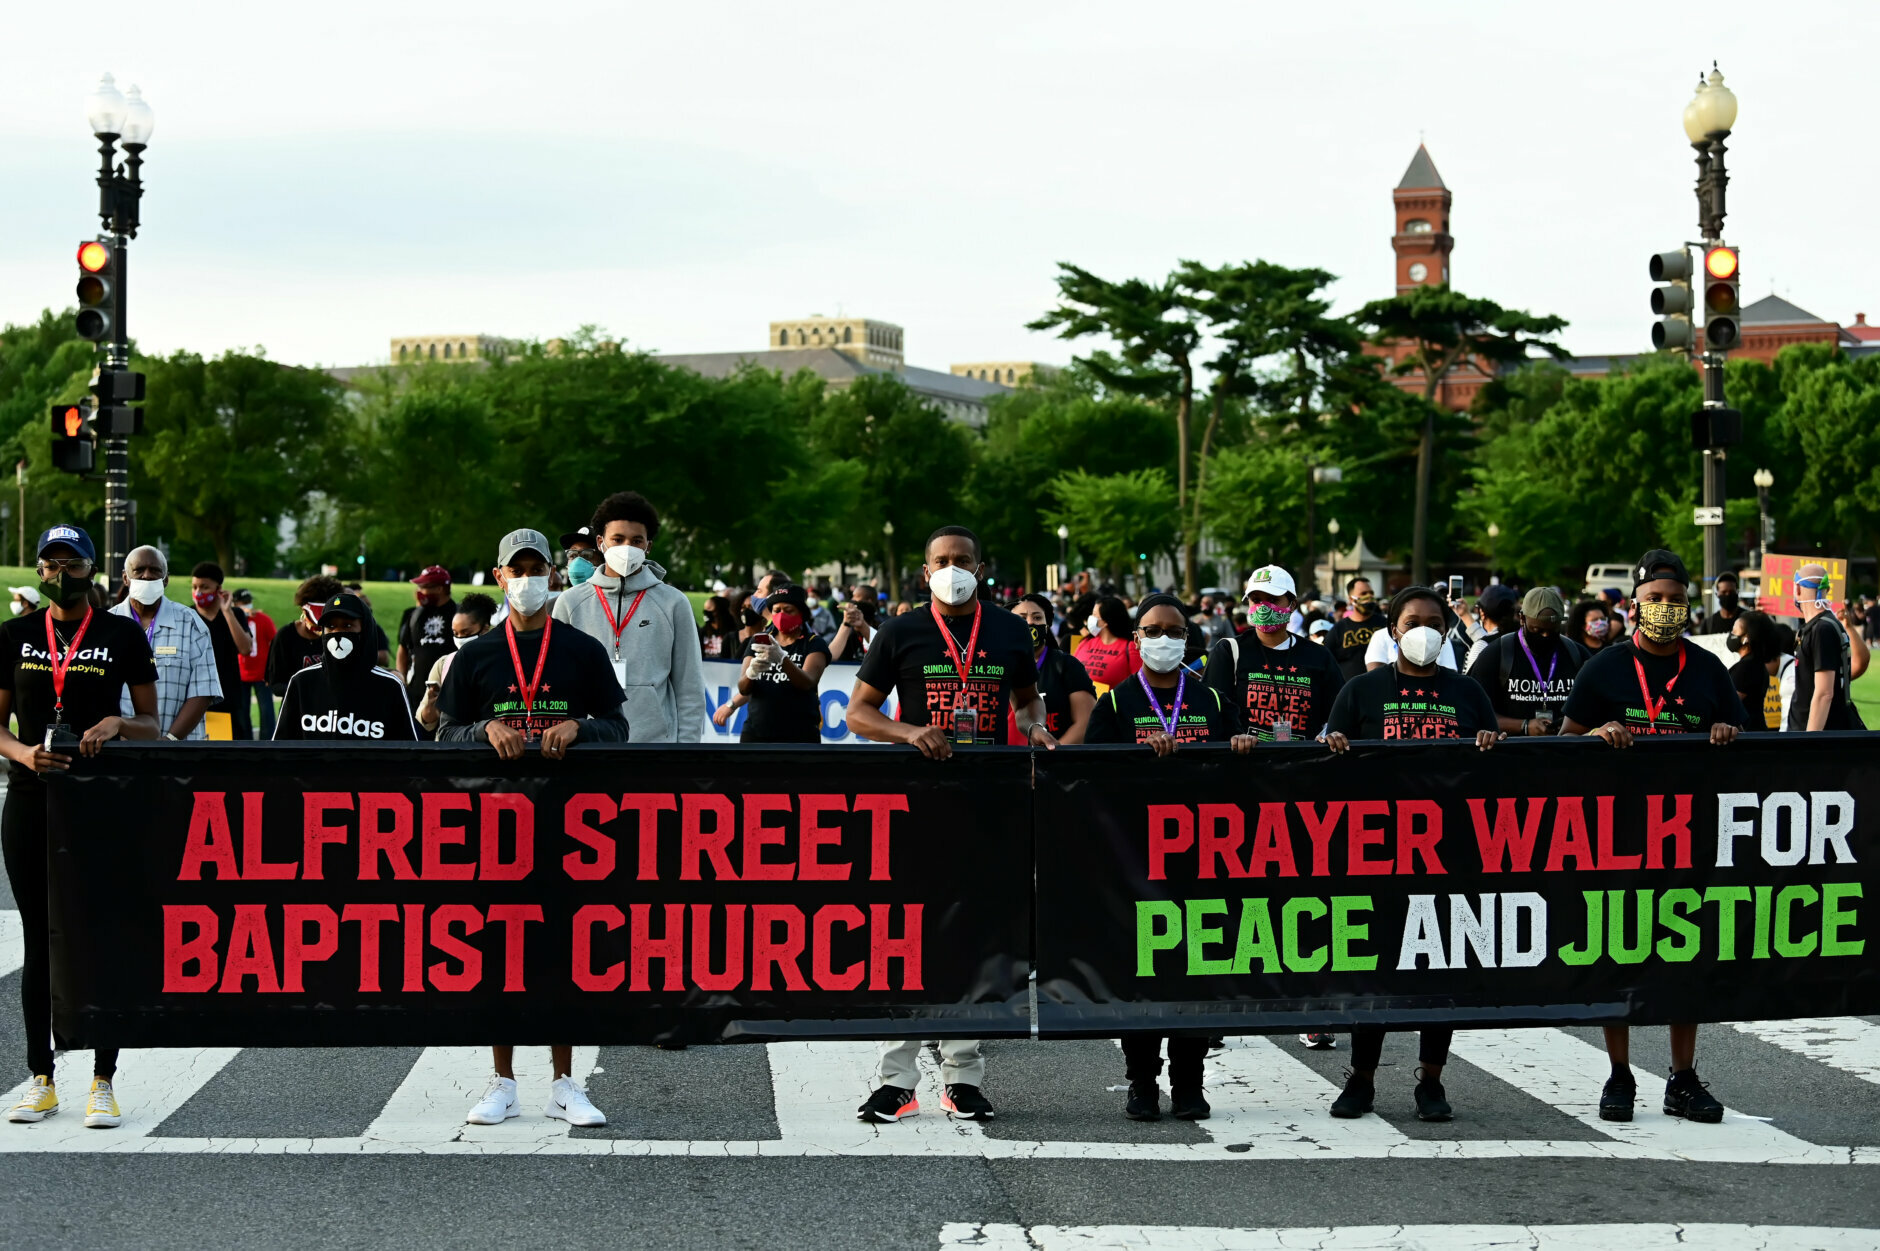 <p>The historic Alfred Street Baptist Church, in Old Town Alexandria, hosted a Prayer Walk for Peace and Justice in downtown D.C. along with the NAACP on Sunday, June 14.</p>
